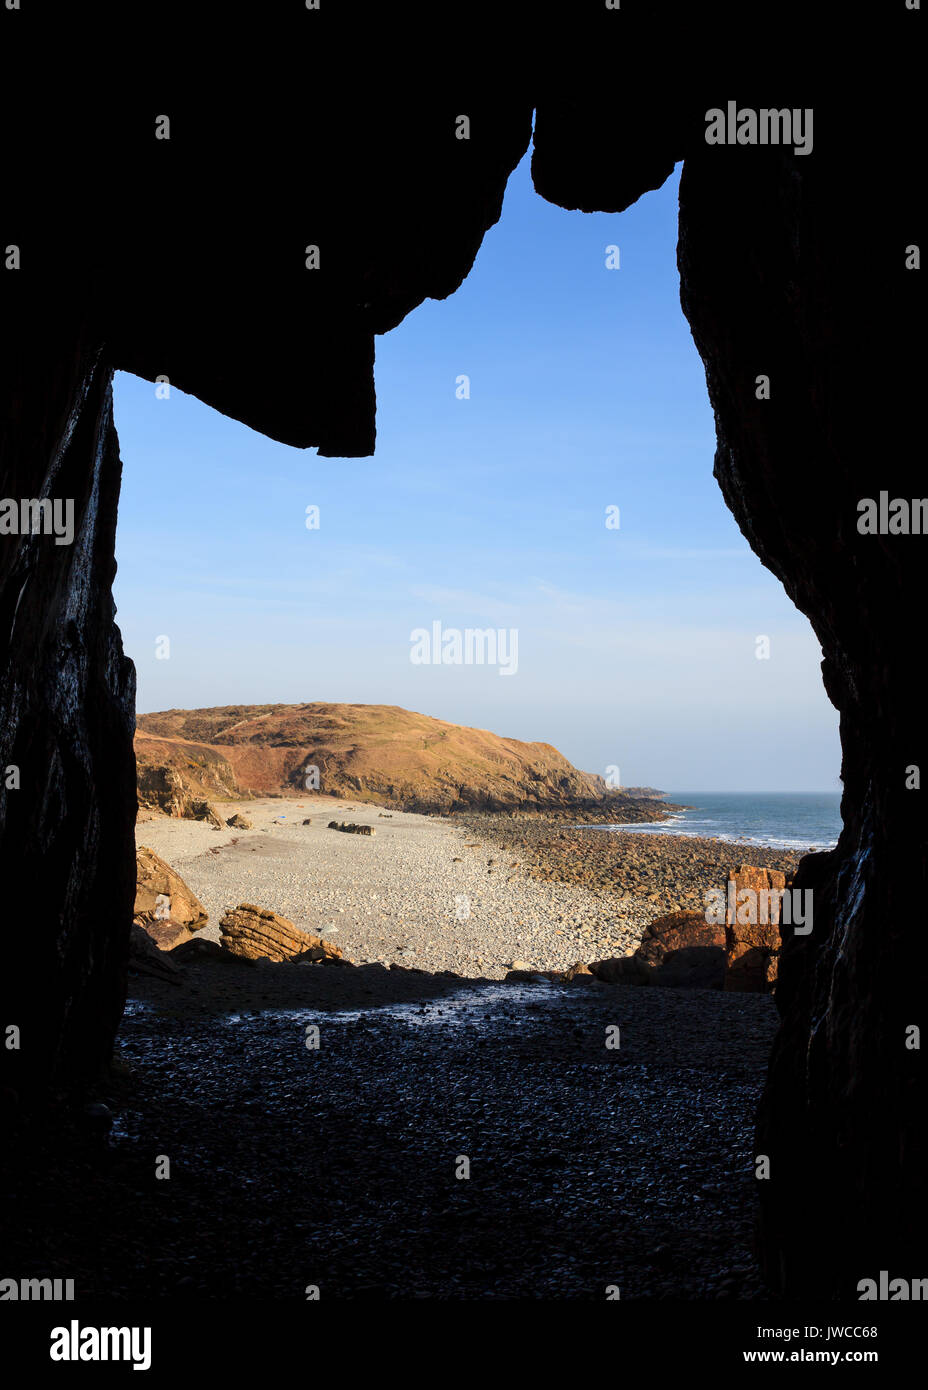 St Ninian's Cave.  The view from St Ninian's cave across Port Castle Bay in Dumfries and Galloway, Southern Scotland. Stock Photo